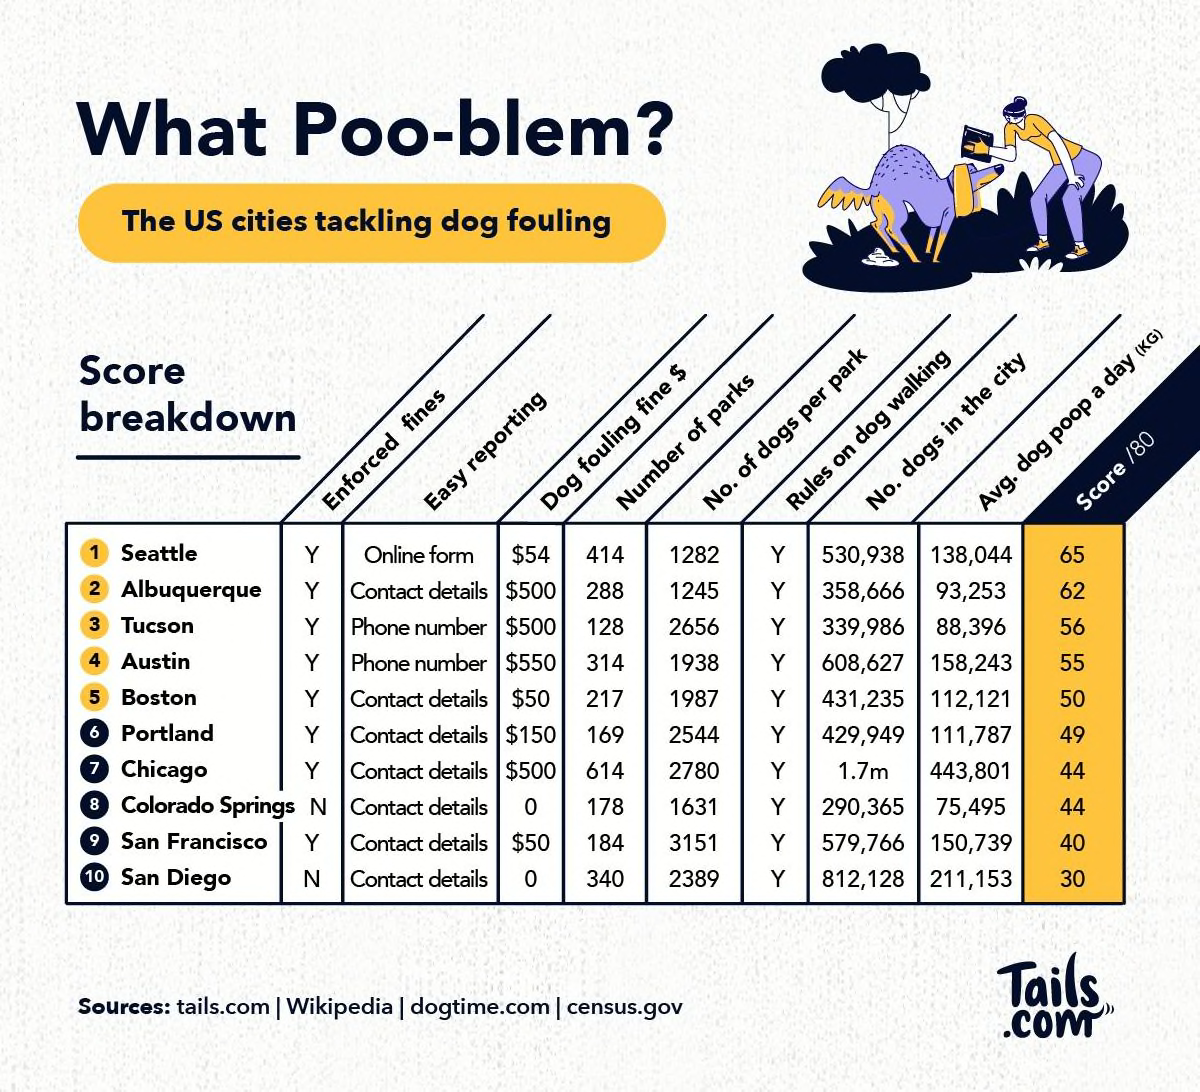 Yes, dog parks can be poop pastures, but are they unsafe? – The